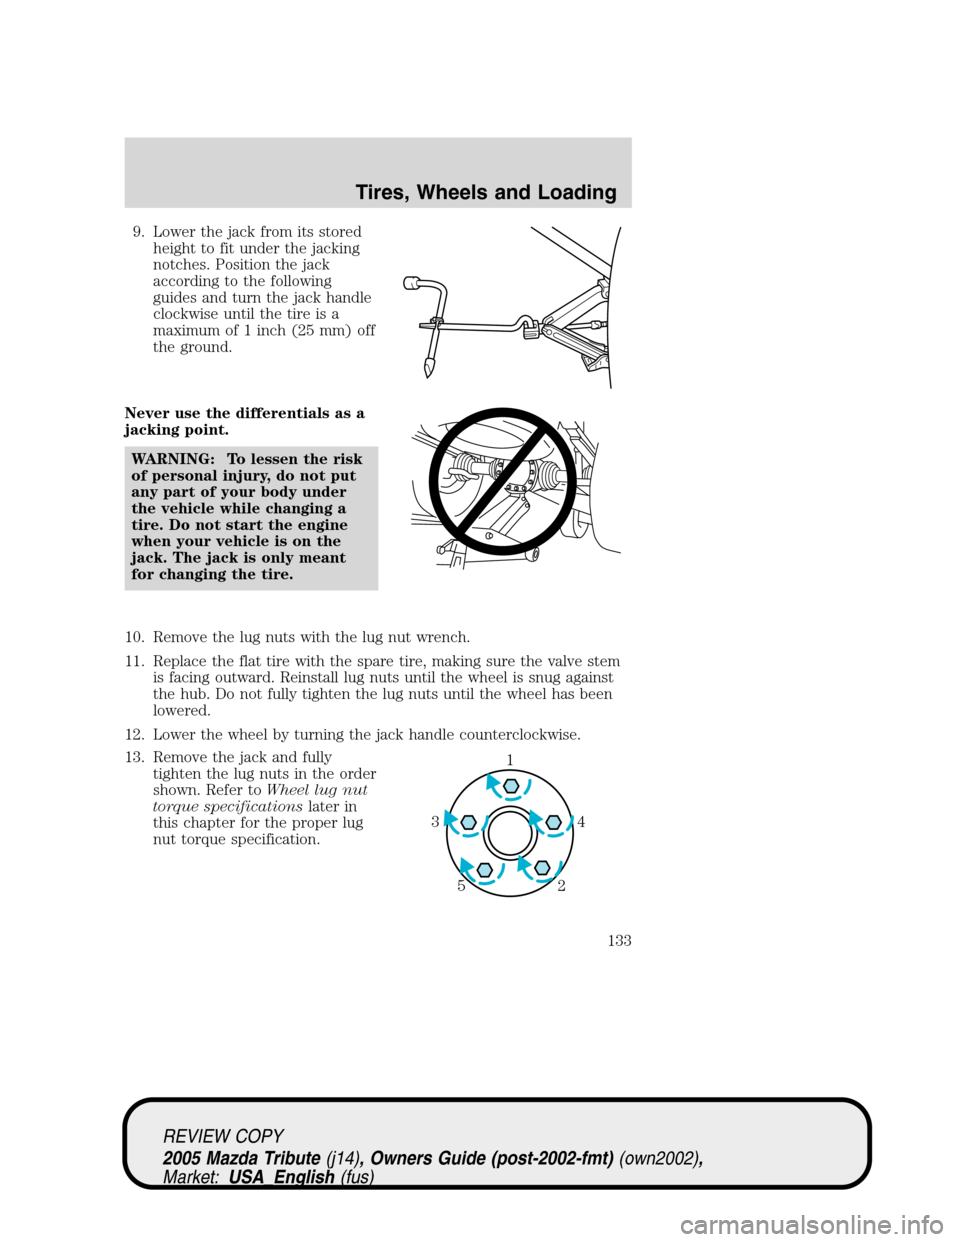 MAZDA MODEL TRIBUTE 2005  Owners Manual (in English) 9. Lower the jack from its stored
height to fit under the jacking
notches. Position the jack
according to the following
guides and turn the jack handle
clockwise until the tire is a
maximum of 1 inch 